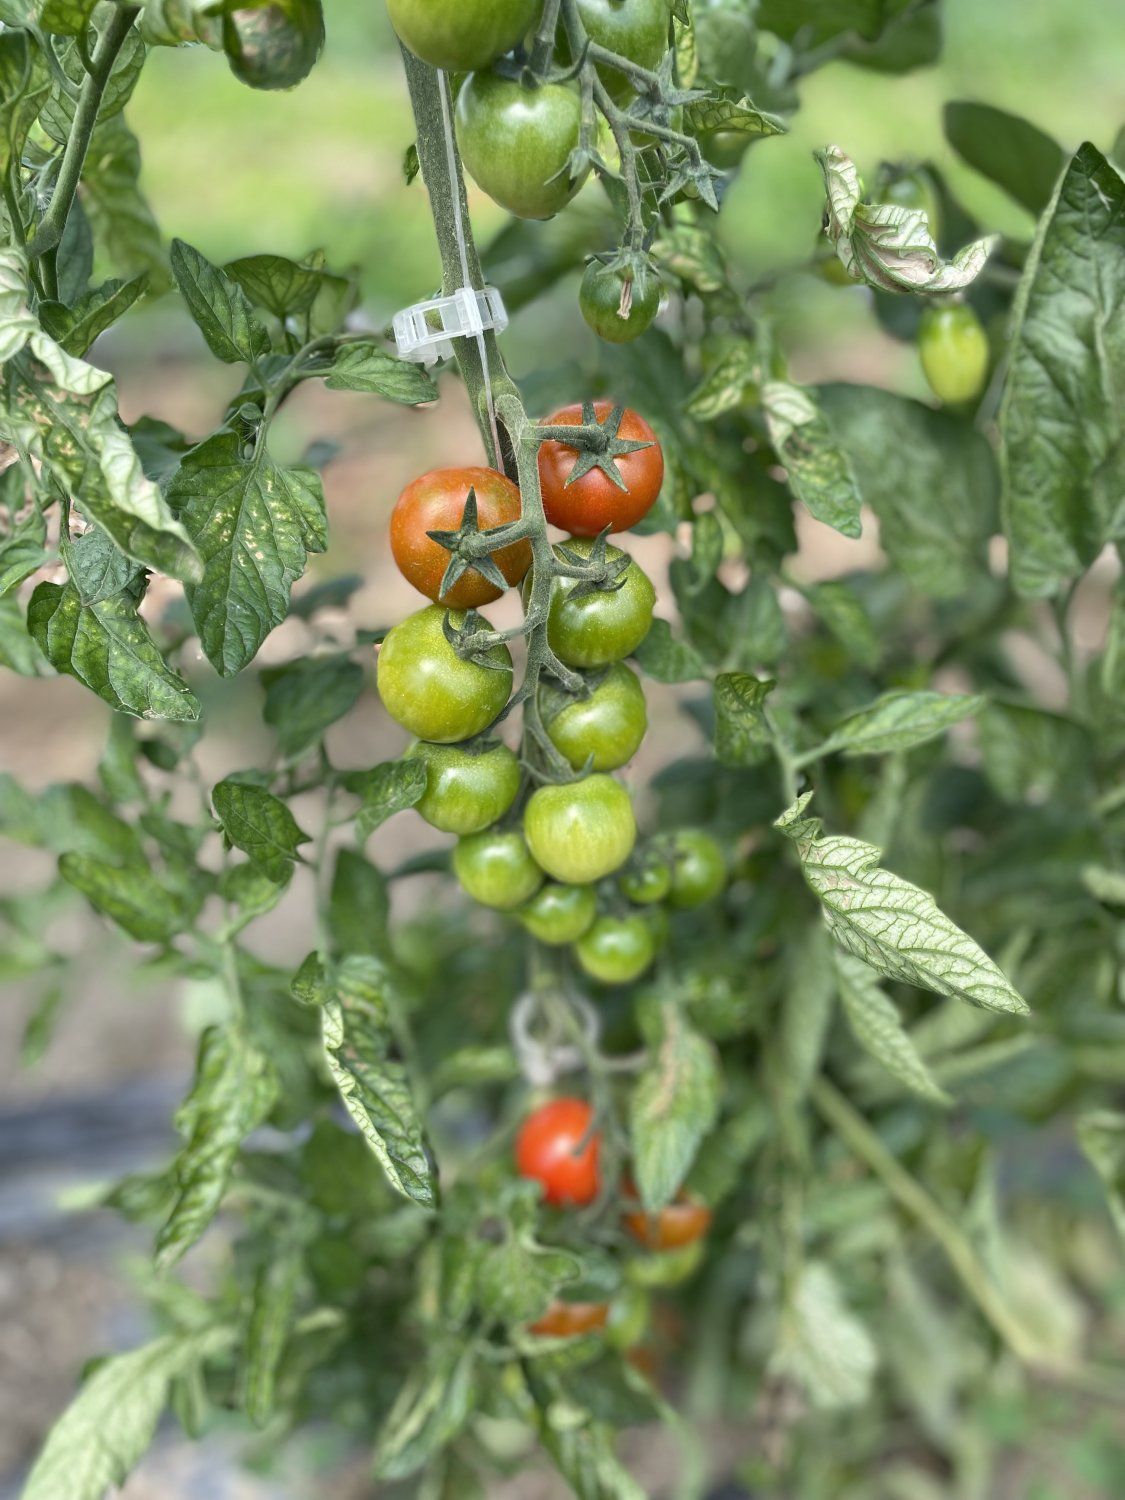 Tomatoes! and a note from YOUR Farmer Joseph Fox!